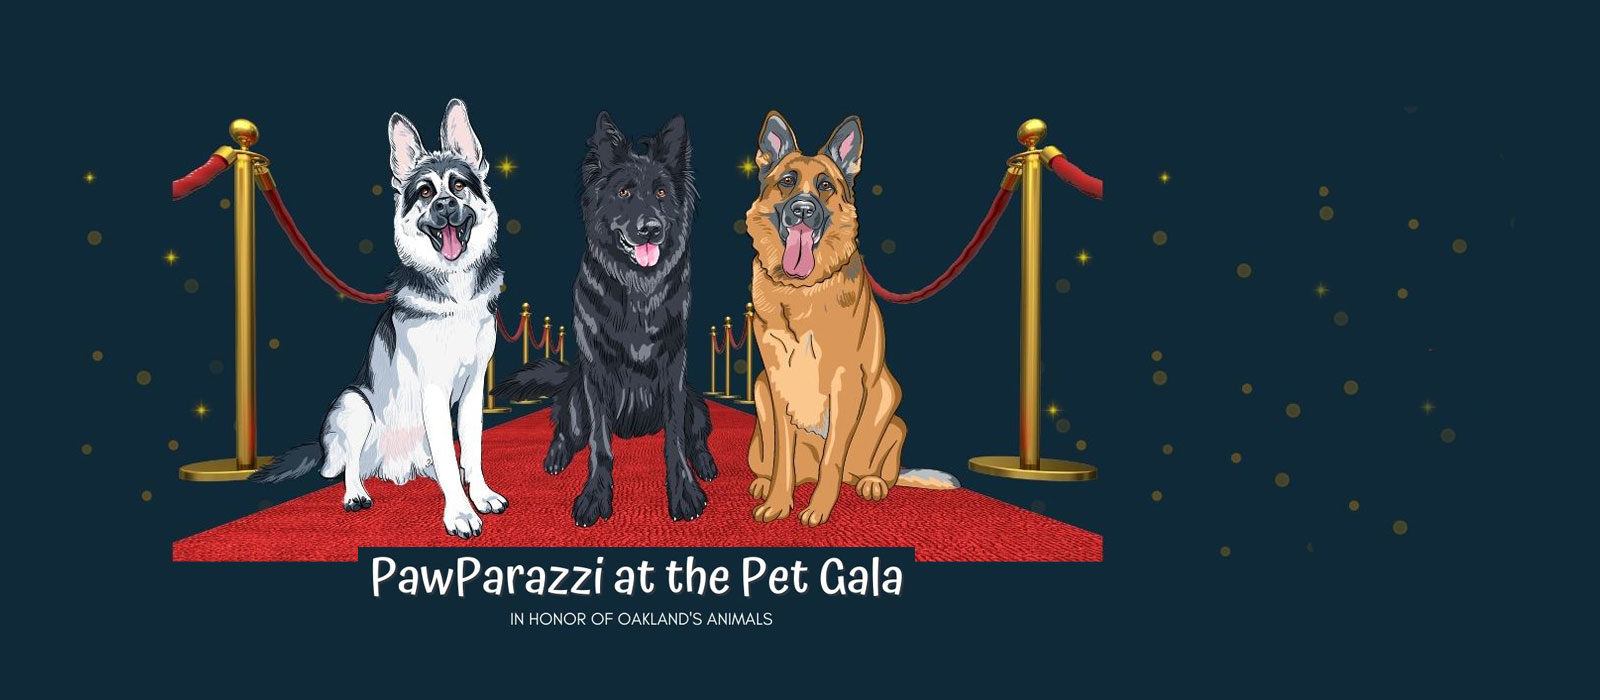 PawParazzi at the Pet Gala, registration now open